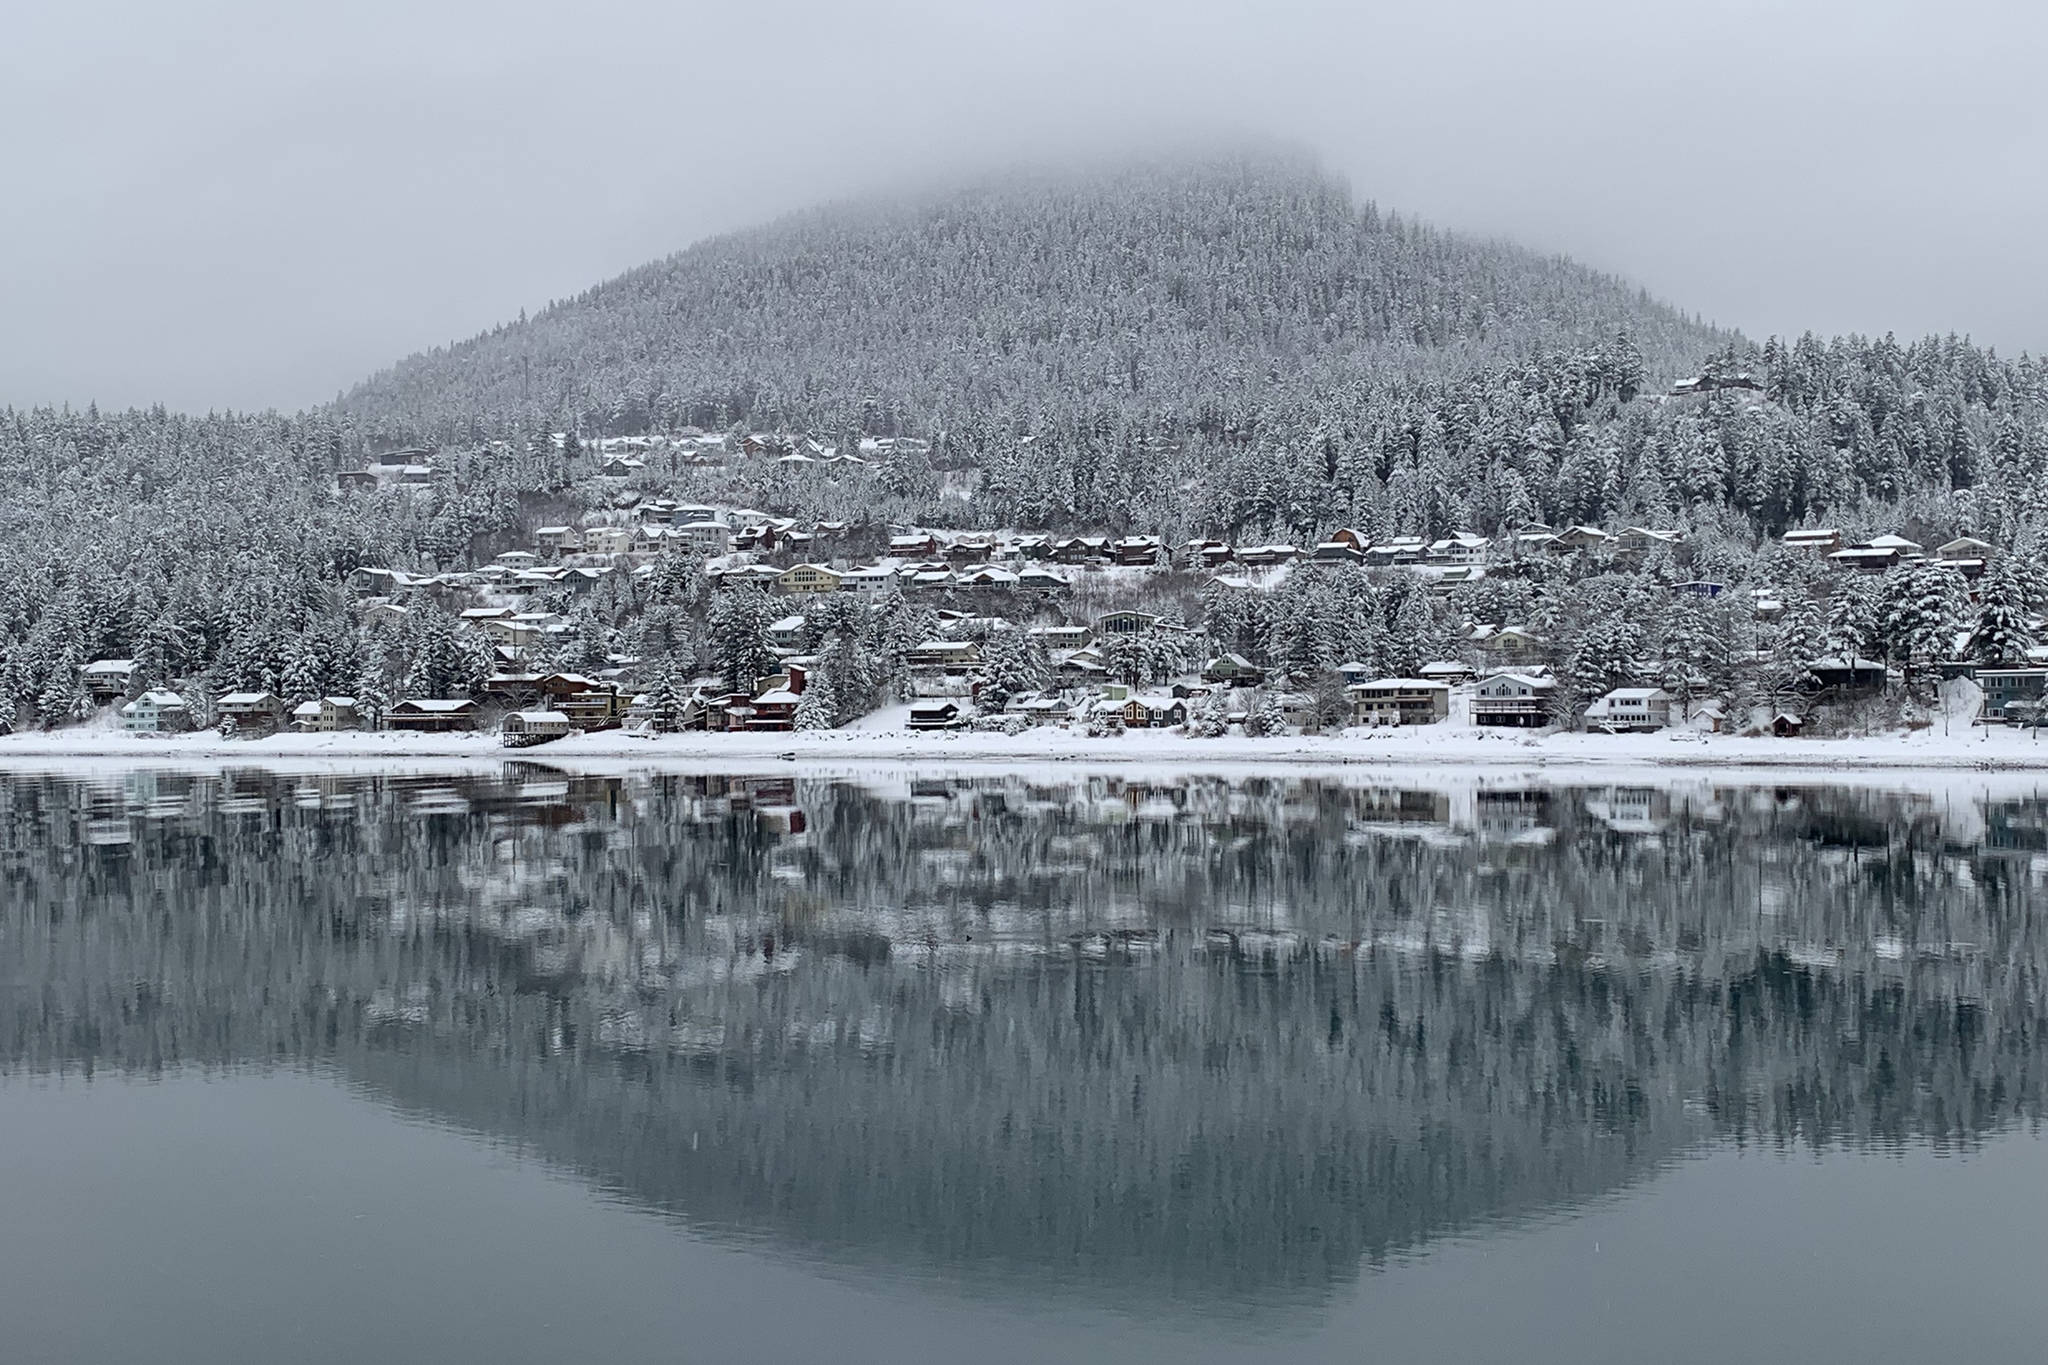 Gastineau Channel, with Douglas Island in the background, pictured Jan. 11, 2019. (Angelo Saggiomo | Juneau Empire)